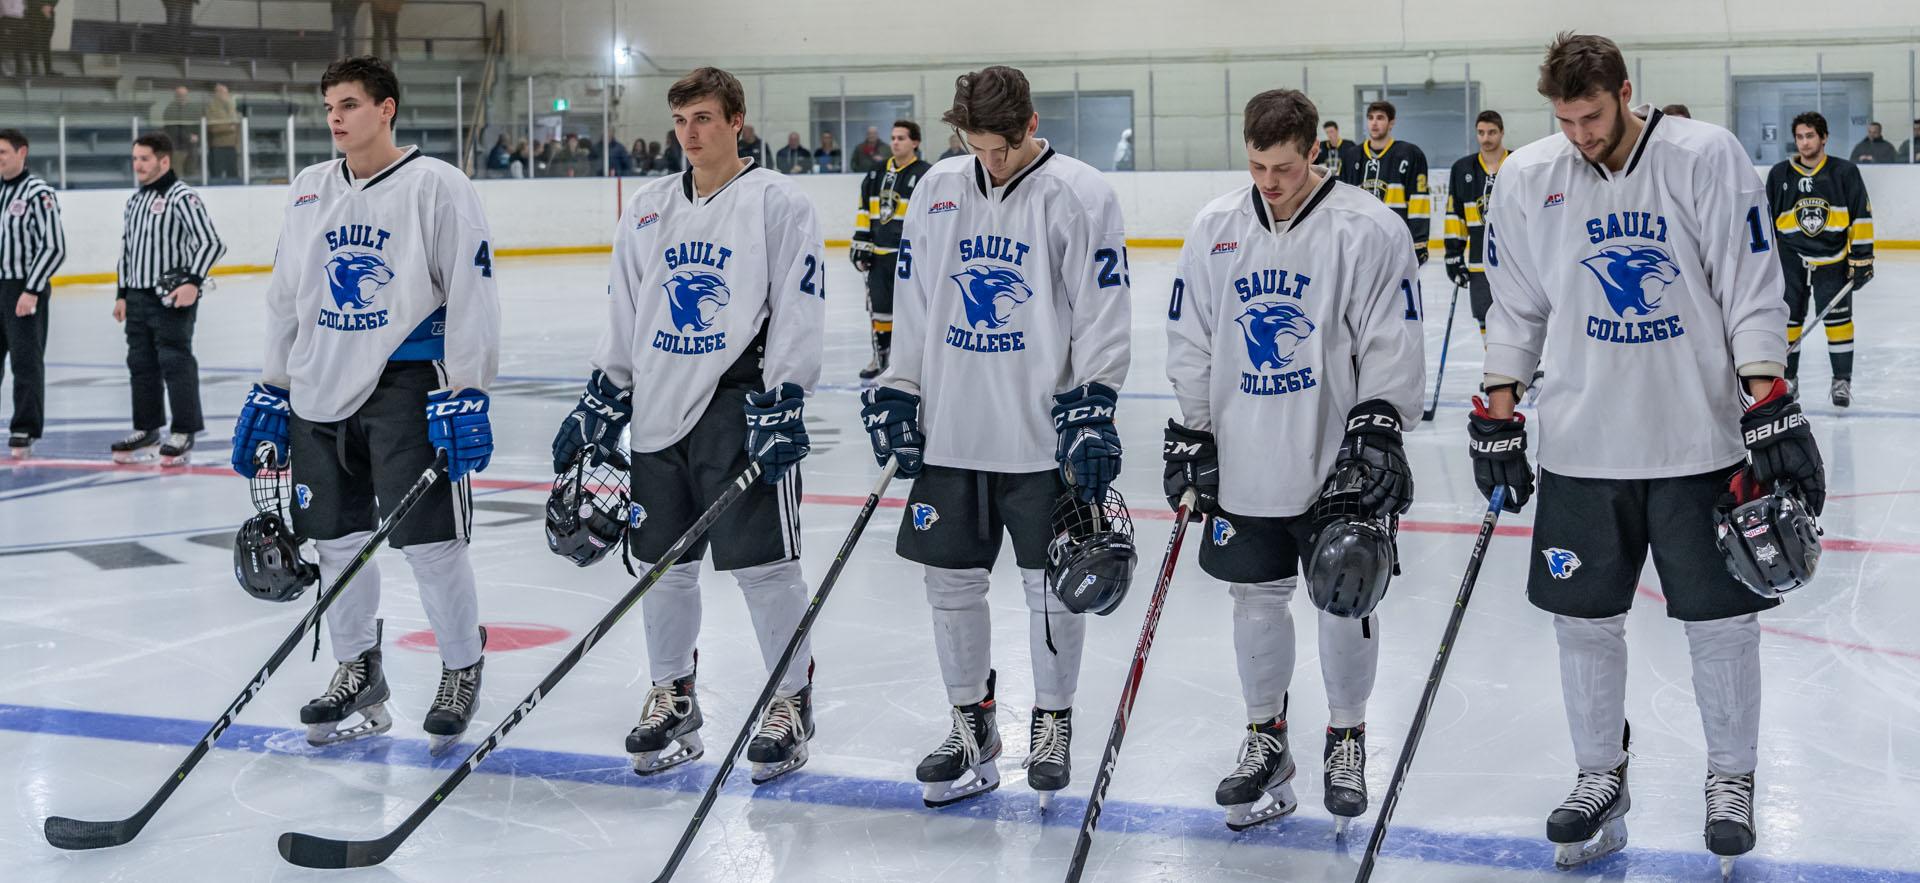 Hockey players lined up at the blue line